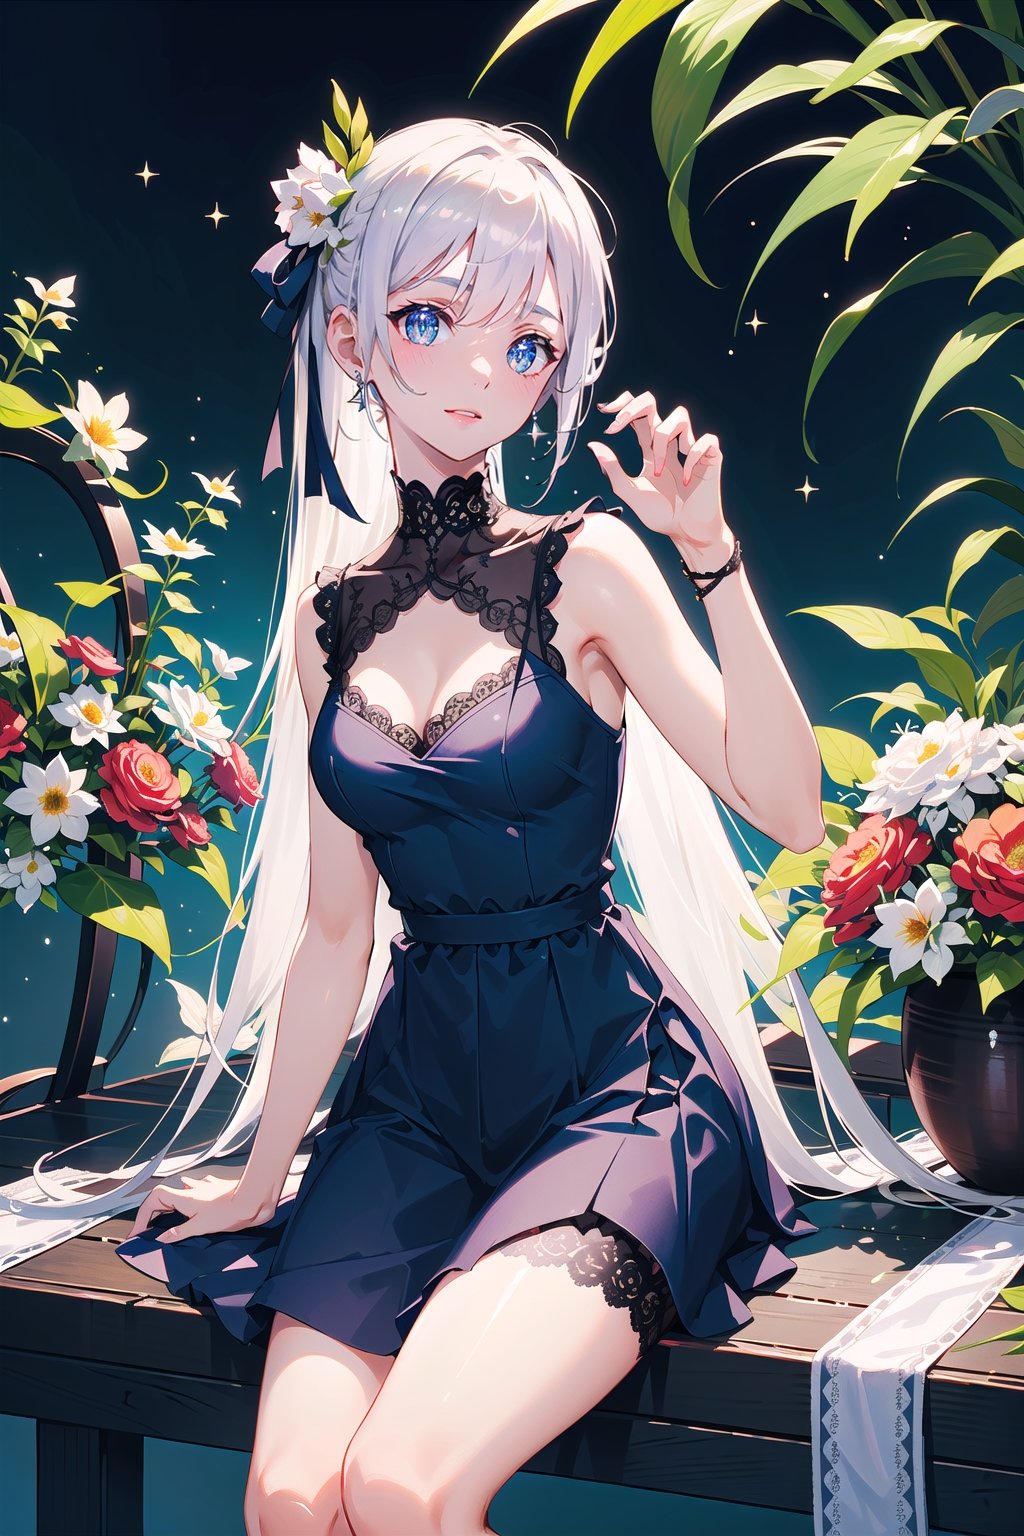 masterpiece, best quality, 1 girl, flowers, floral background, nature, pose, perfect hands, modern outfit, detailed, sparkling, sitting, lace detail, long hair, ultra detailed, ultra detailed face, clear eyes, good lighting,, perfect anatomy, stylish outfit, different hairstyles, hair ribbons